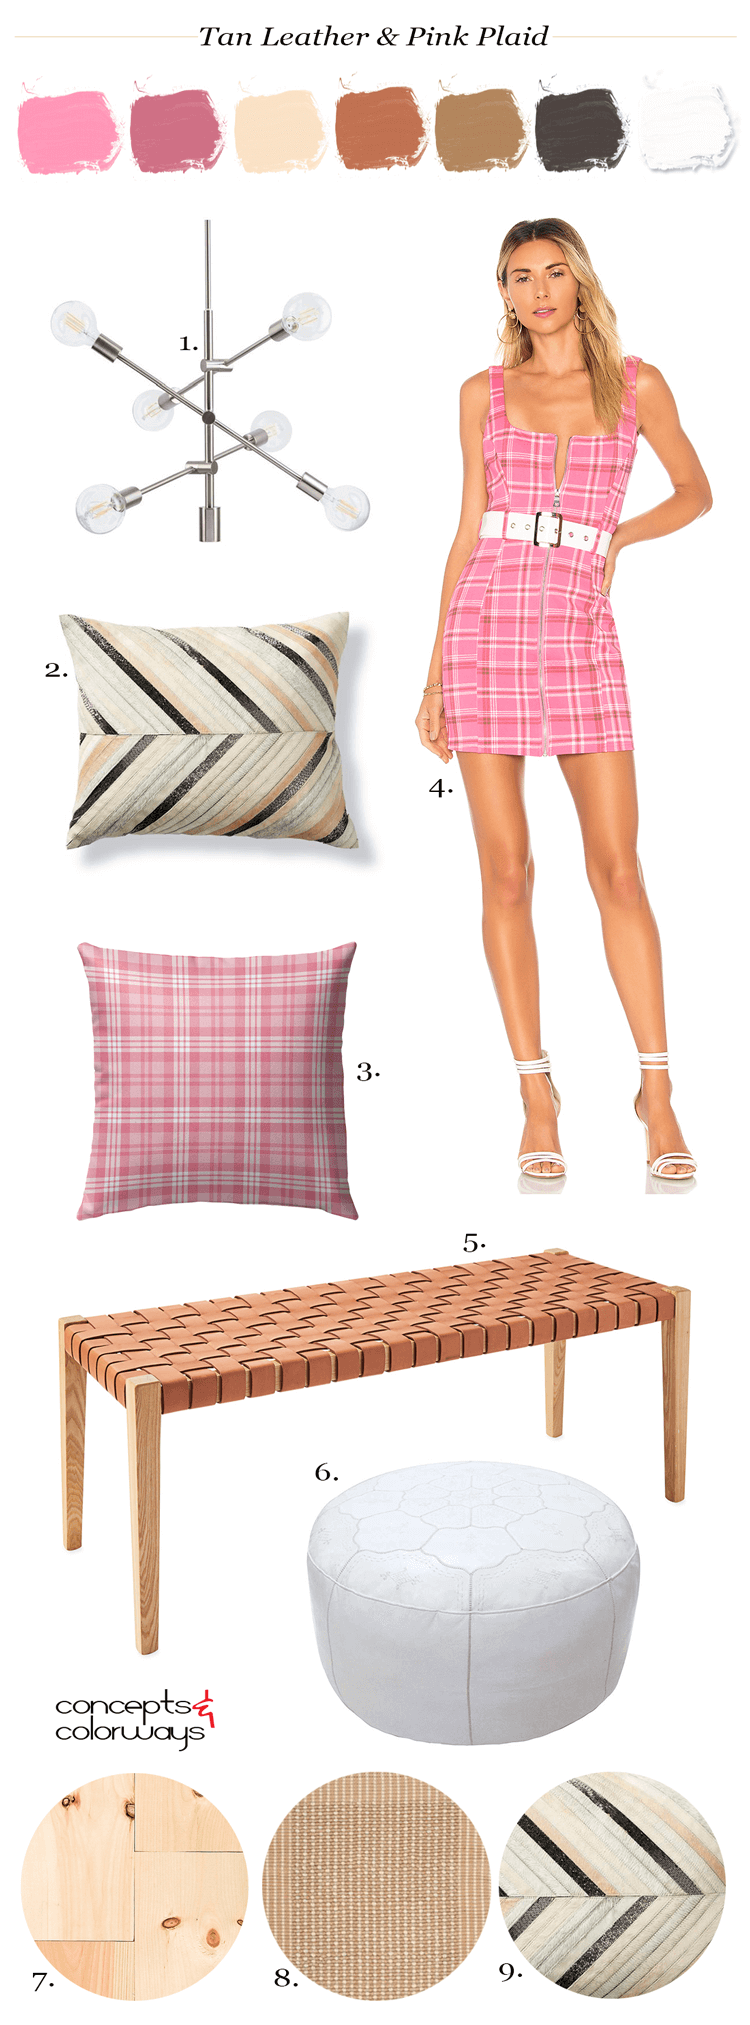 tan leather, pink plaid, hot pink decor, pink room decor, pink and tan, pink plaid dress, plaid dress, pink plaid pillow, maple flooring, tan rug, cowhide pillows, white leather pouf, woven leather bench, modern chandeliers, interior design ideas, pantone rapture rose